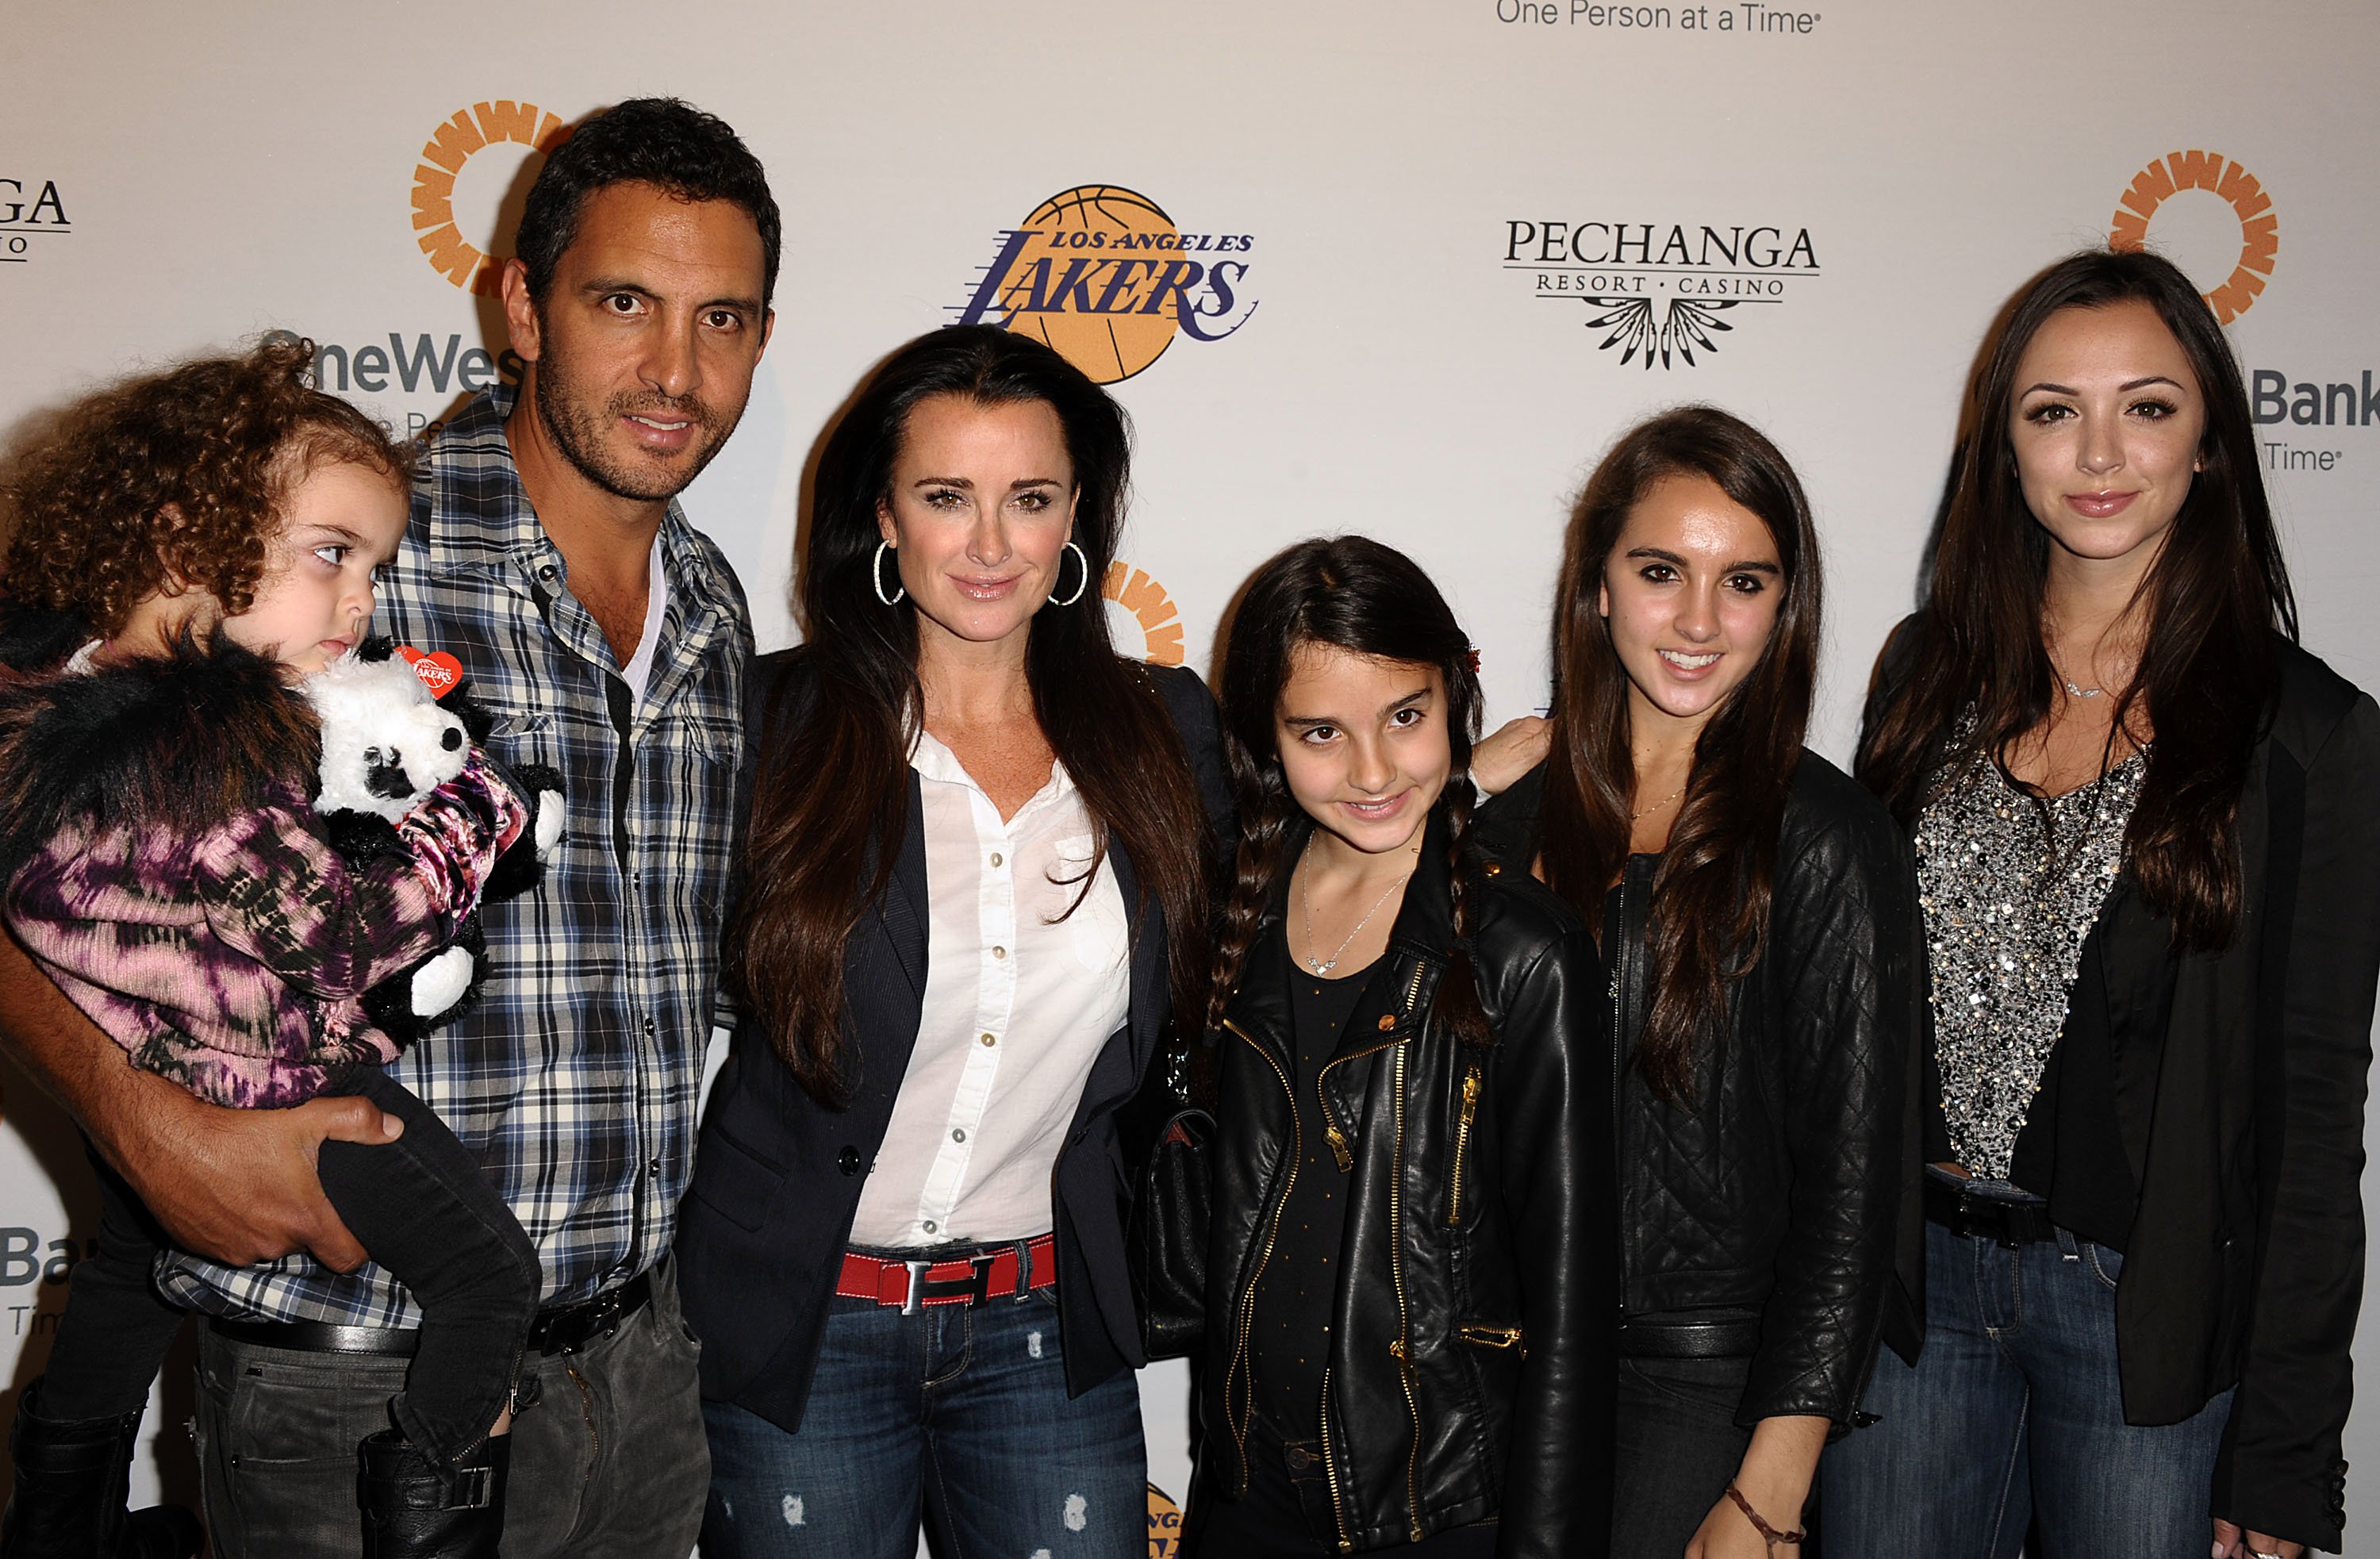 Kyle Richards and Mauricio Umansky with daughters Portia Umansky, Sophia Umansky, Alexia Umansky and Farrah Aldjufrie attend the Lakers casino night at Staples Center on April 3, 2011 in Los Angeles, California. | Source: Getty Images